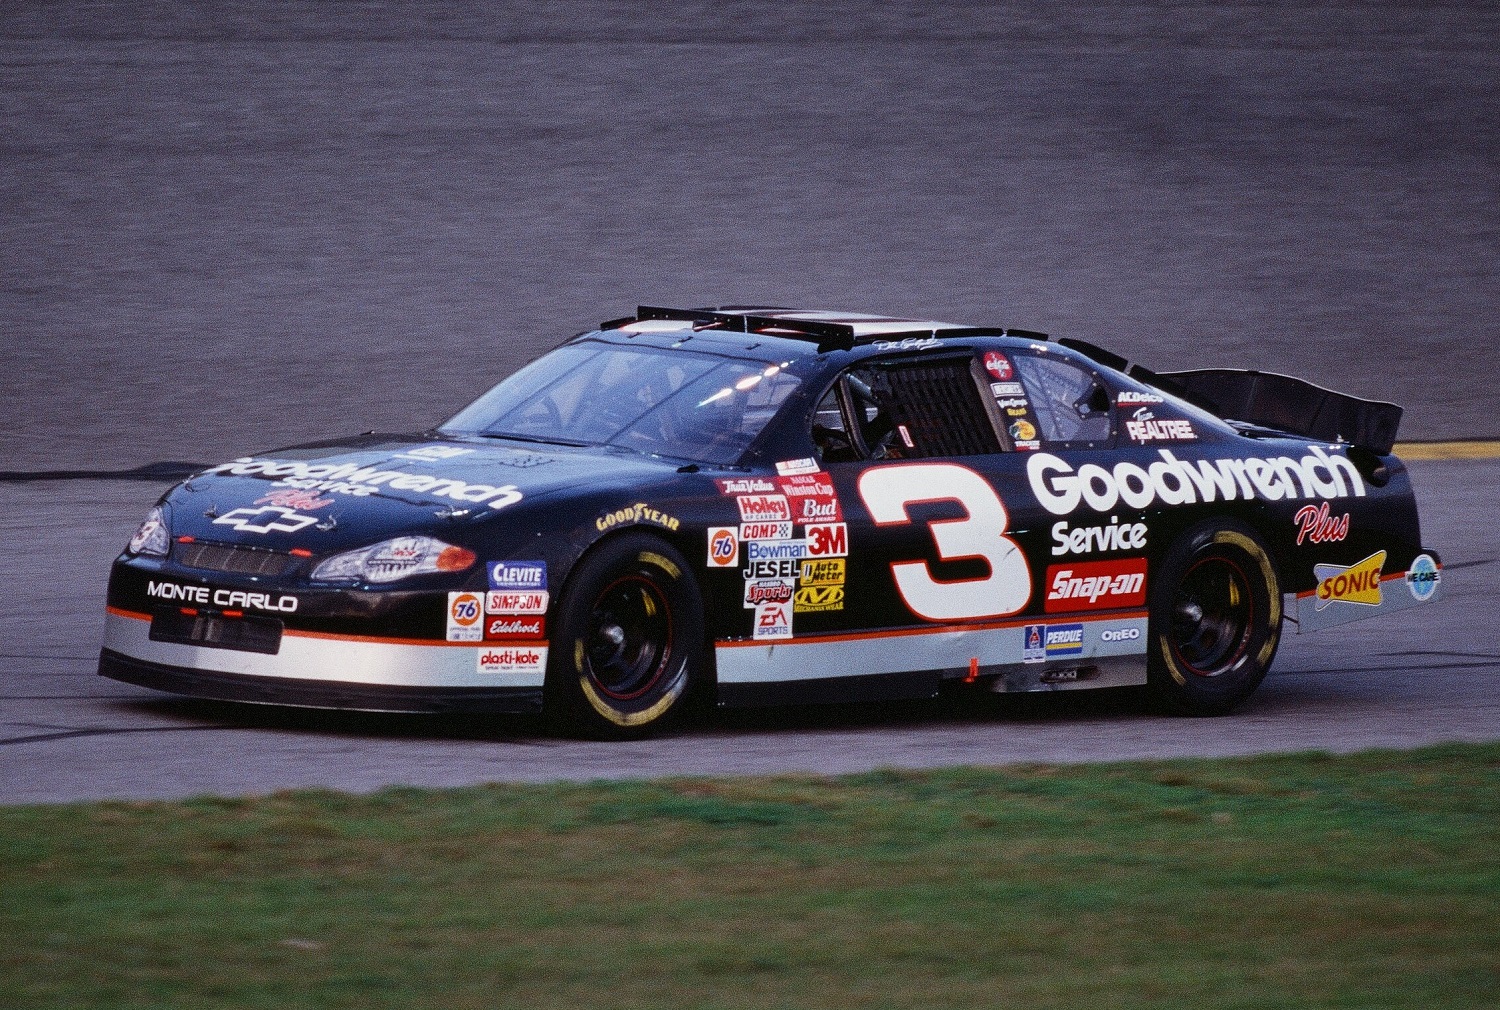 Dale Earnhardt drives his No. 3 Chevrolet during practice for the Daytona 500 | Getty Images